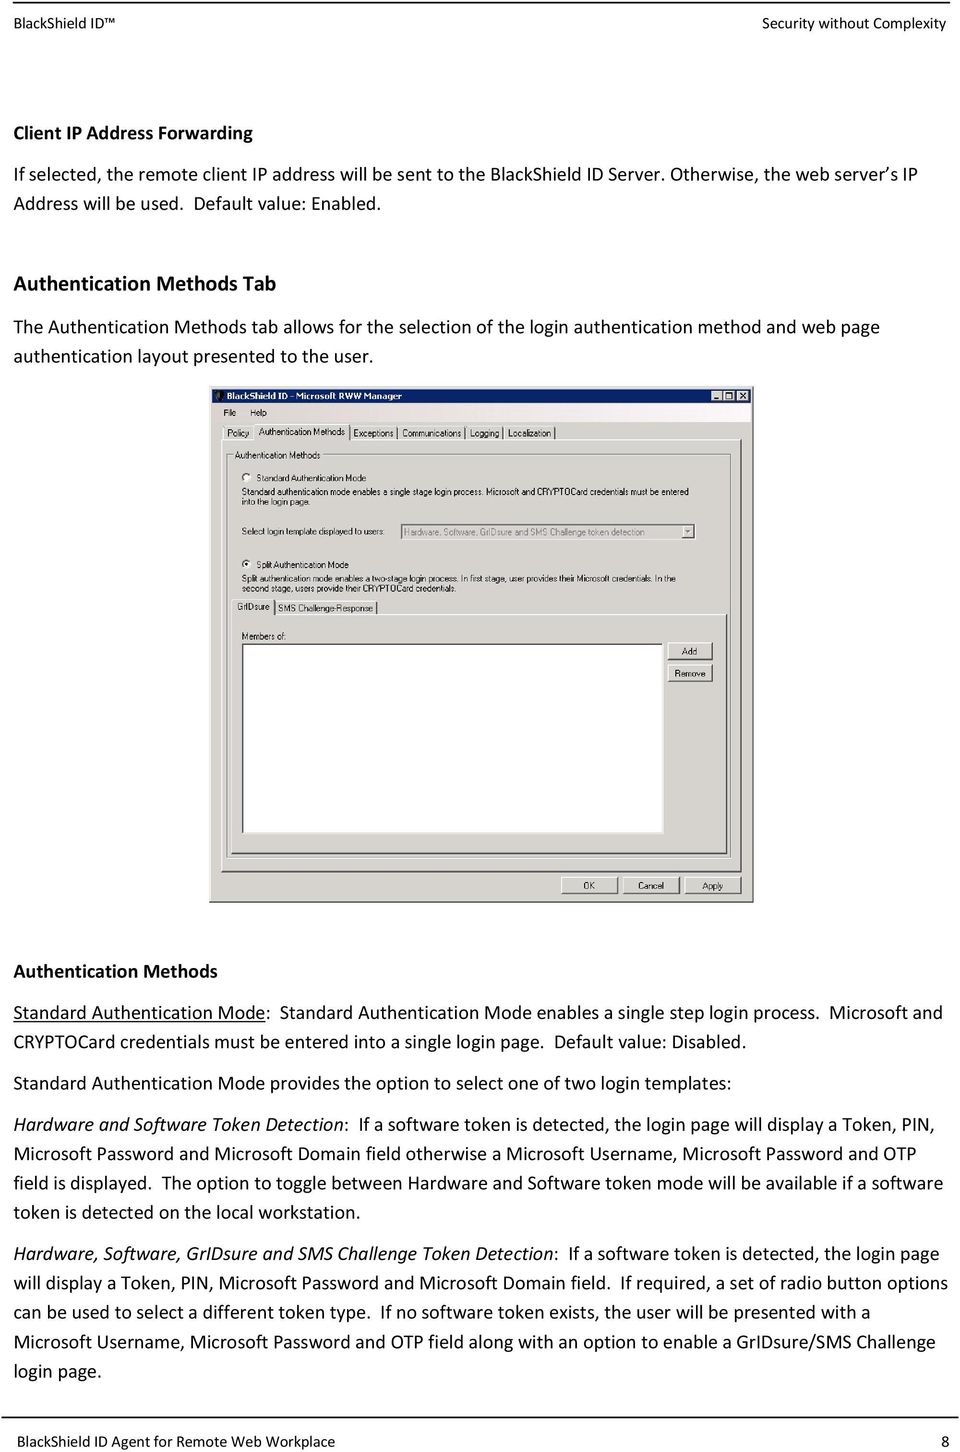 Authentication Methods Standard Authentication Mode: Standard Authentication Mode enables a single step login process. Microsoft and CRYPTOCard credentials must be entered into a single login page.